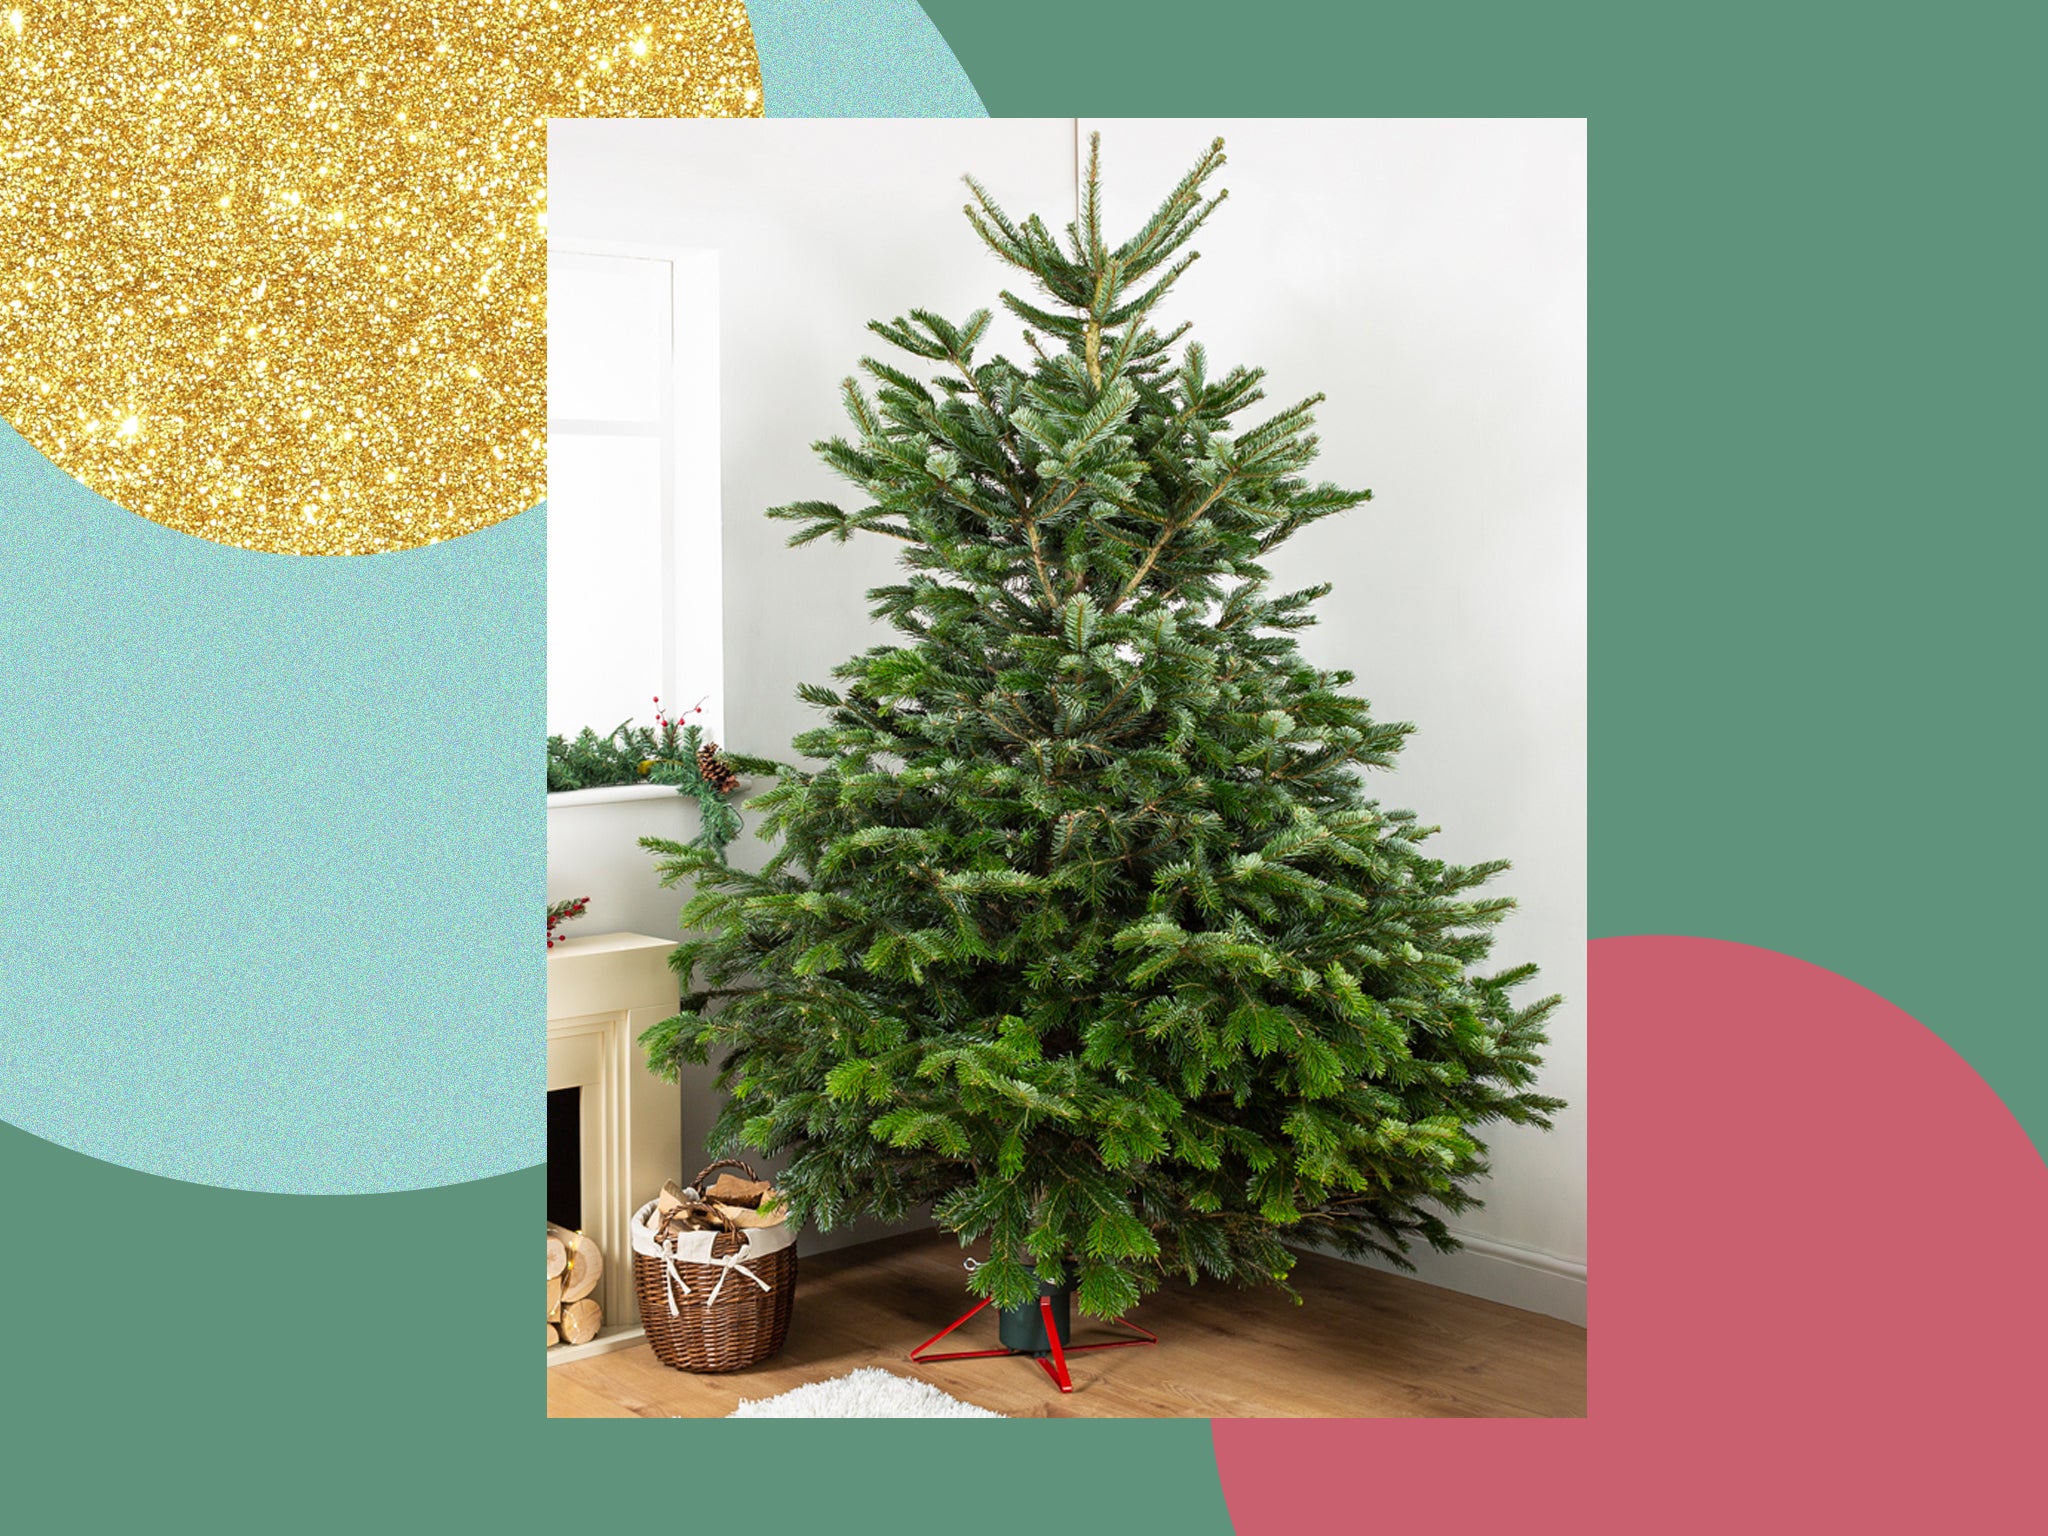 13 ideas to hide the Christmas tree stand